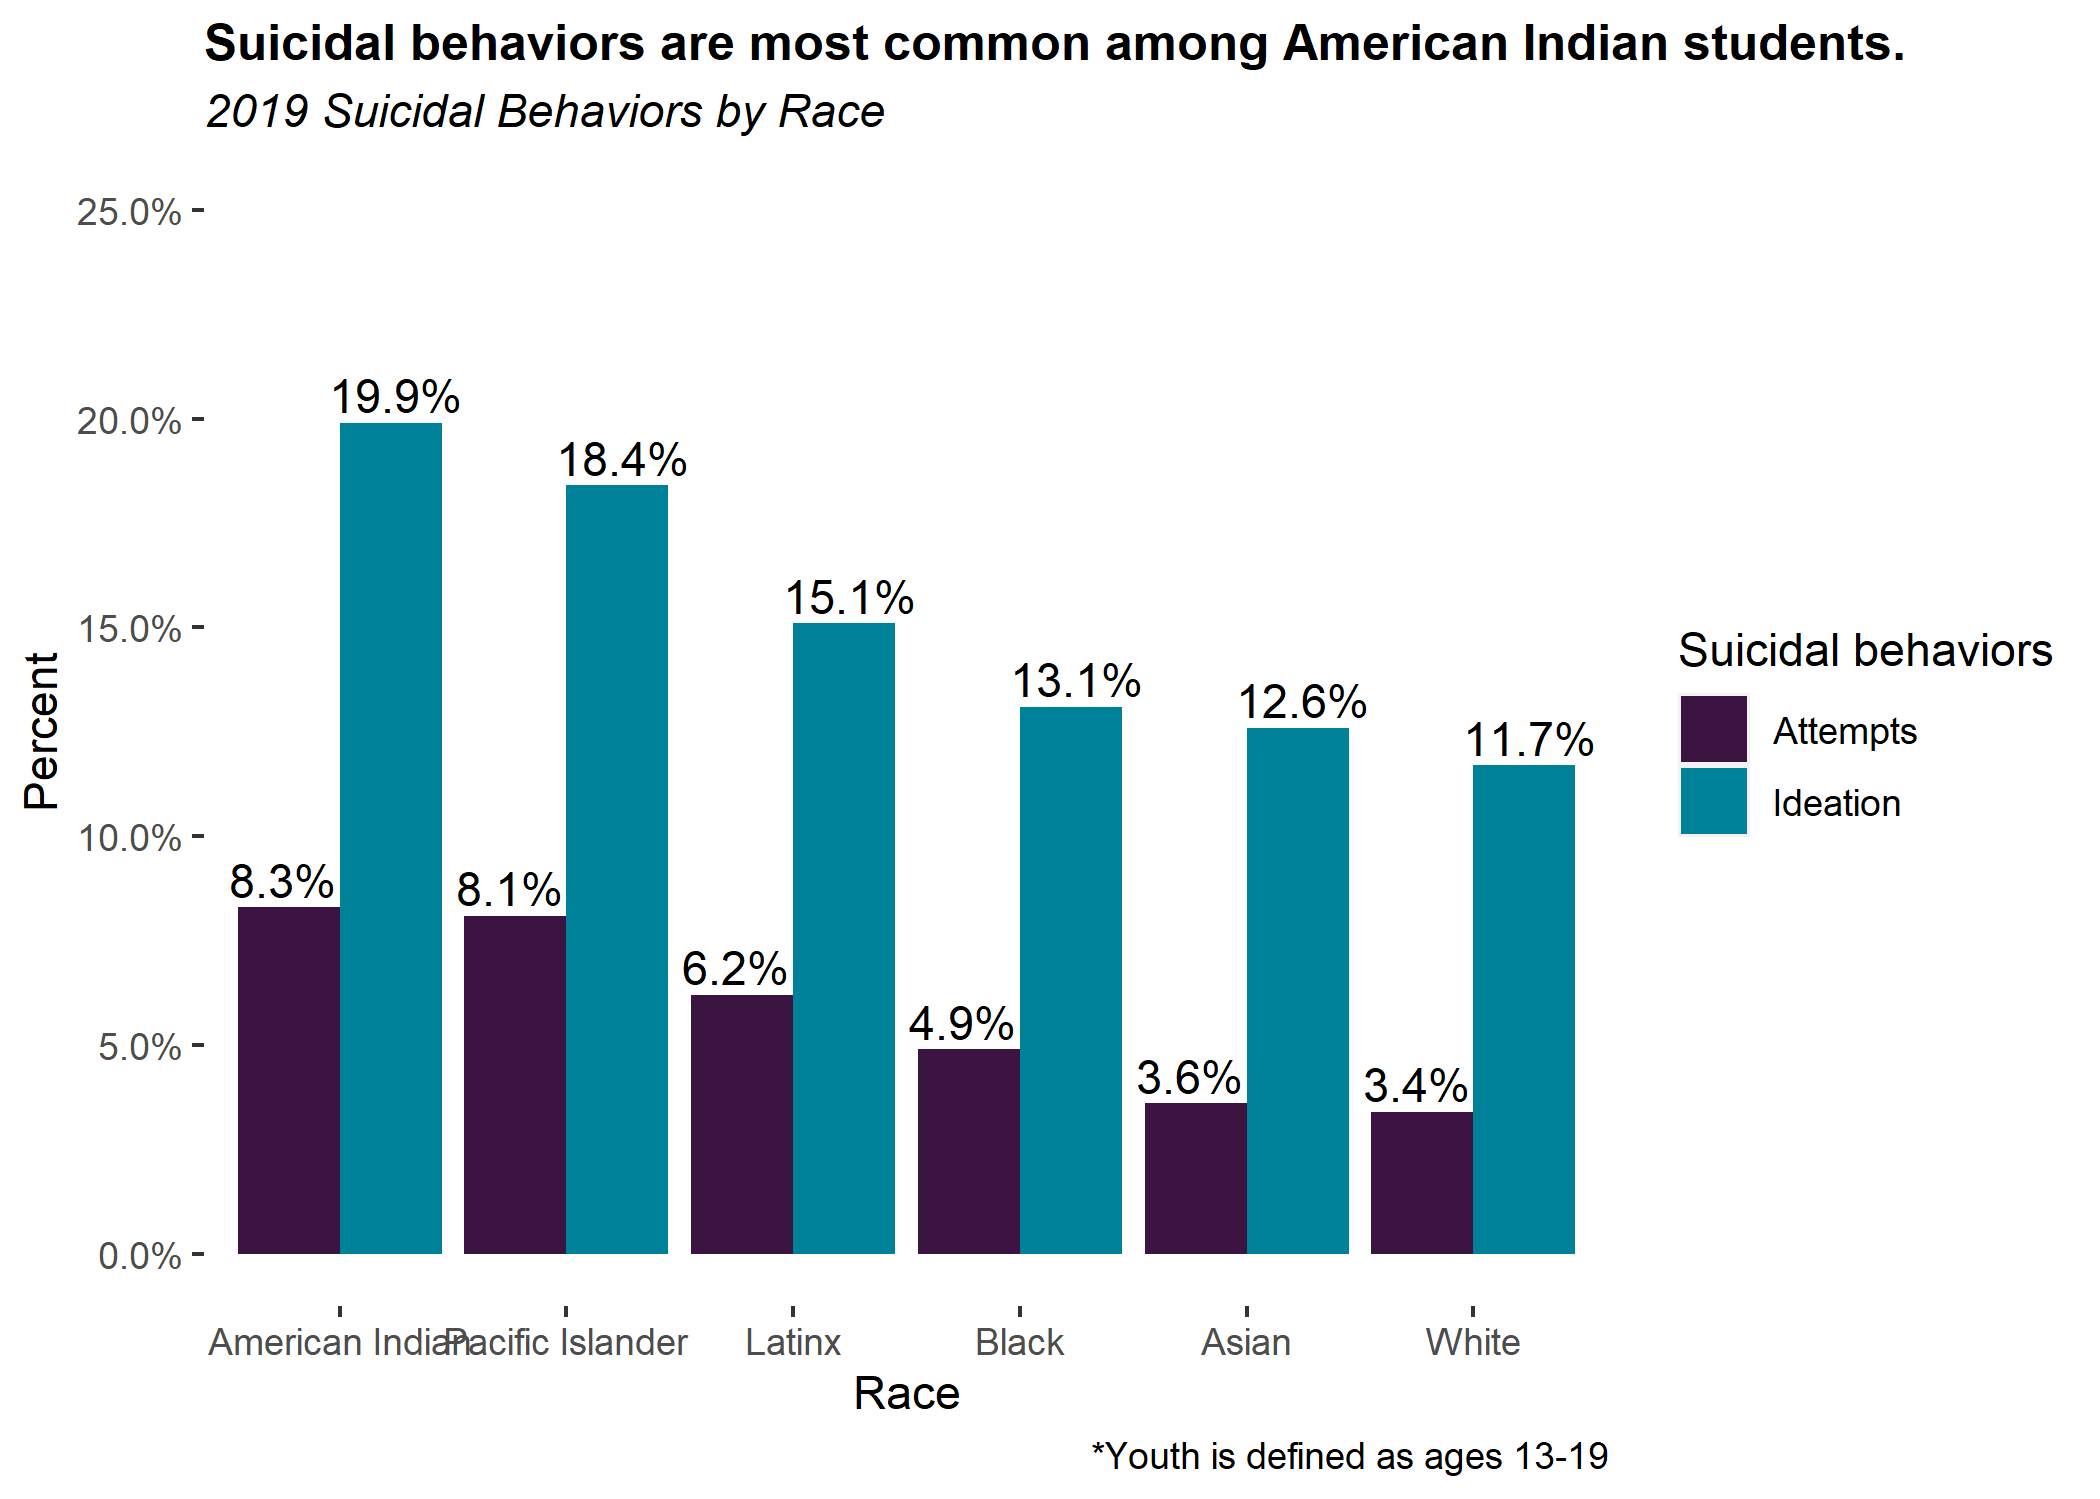 2019 suicidal behaviors by race. Suicidal behaviors are most common among American Indian students.